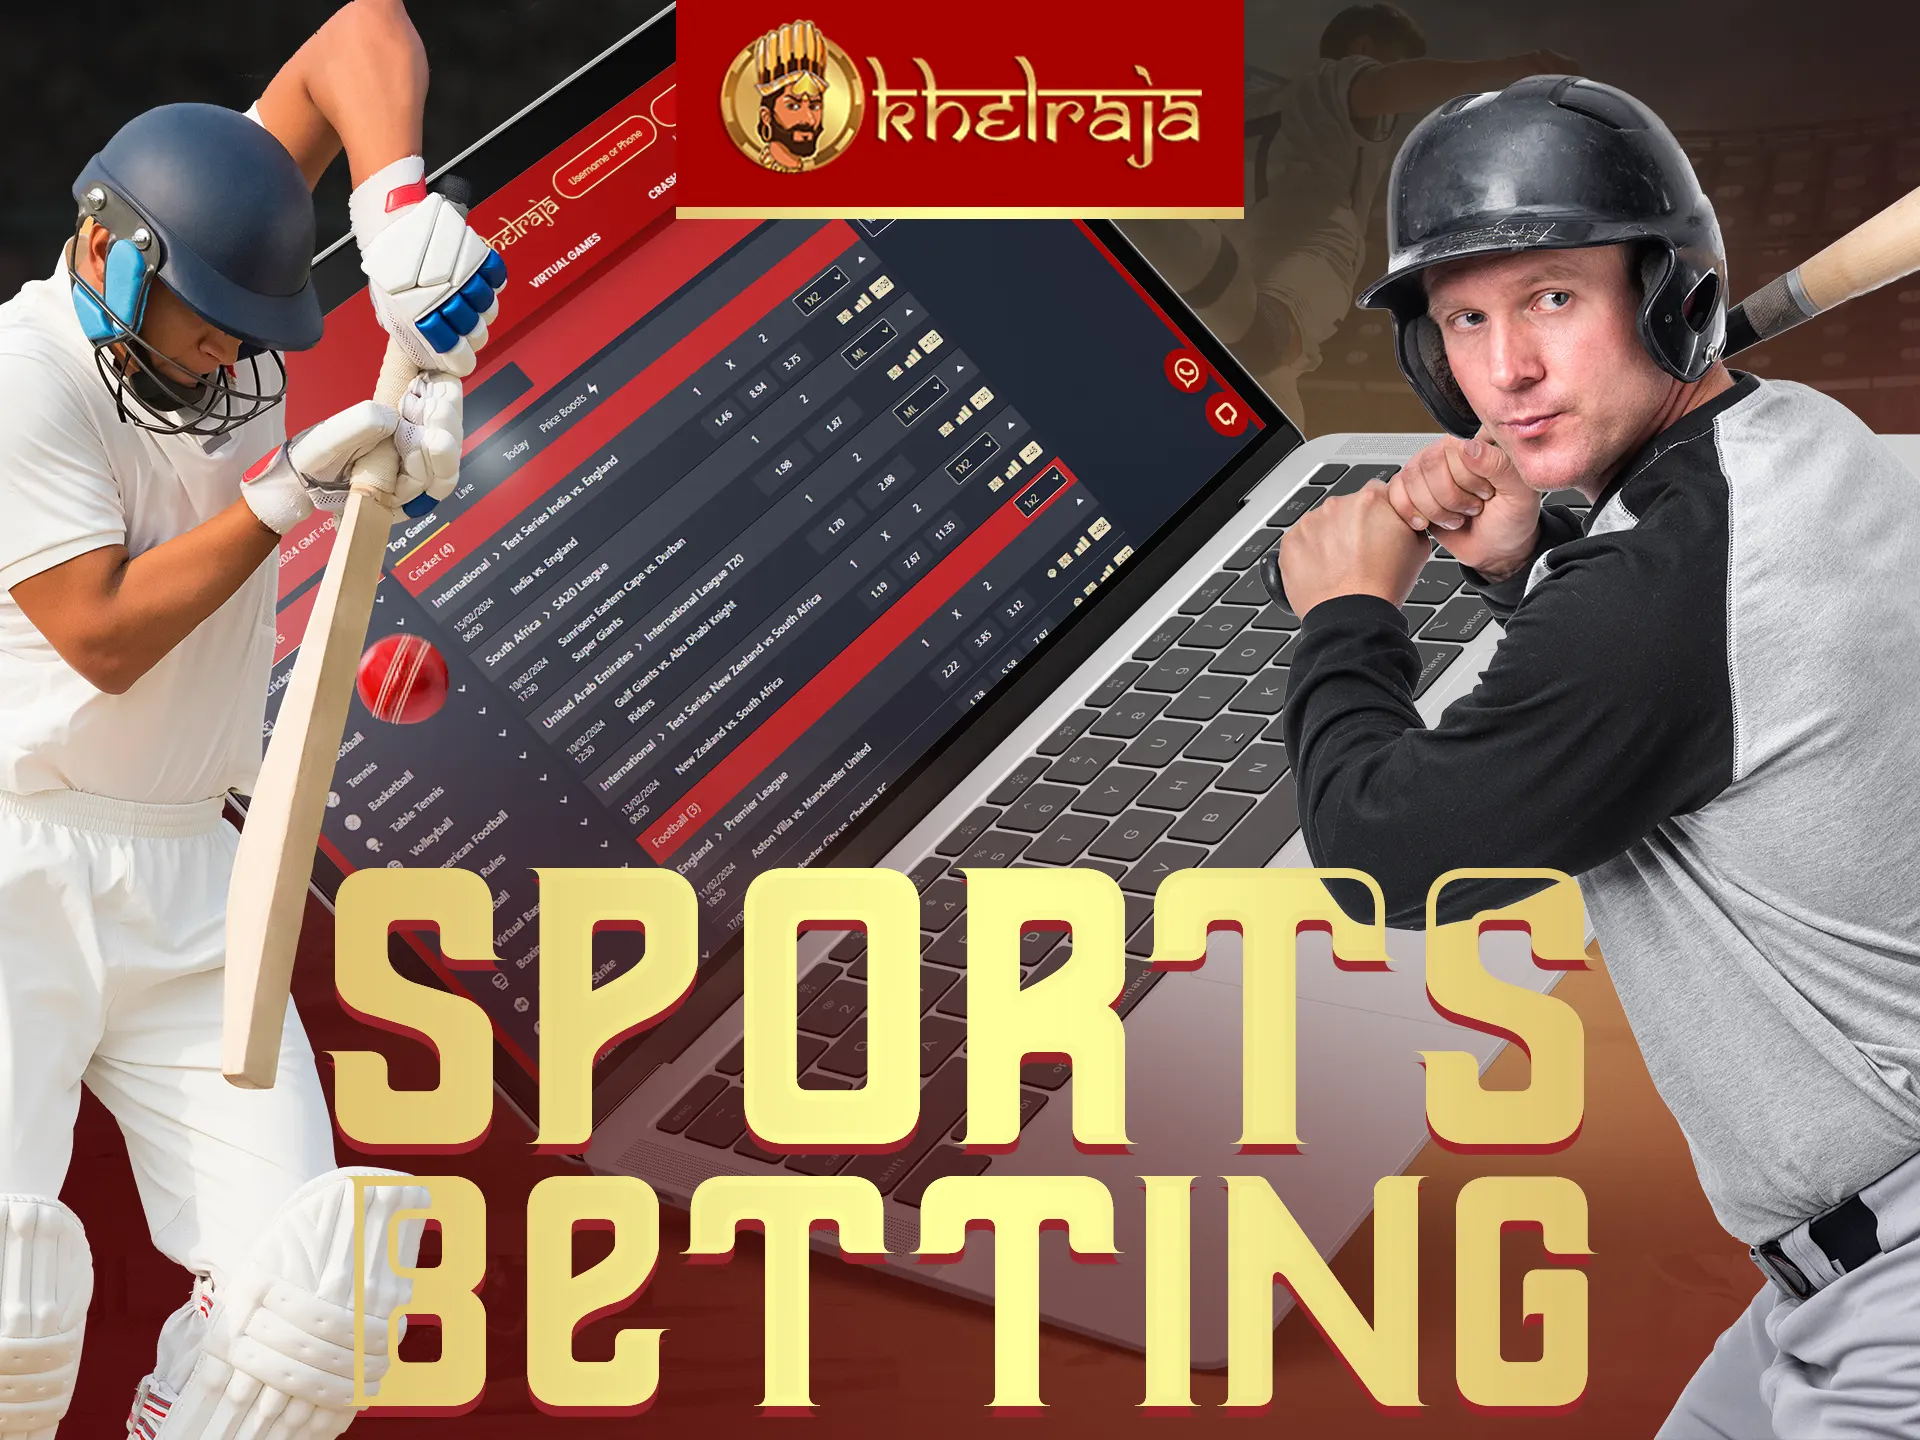 Khelraja offers diverse sports betting options for enthusiasts.